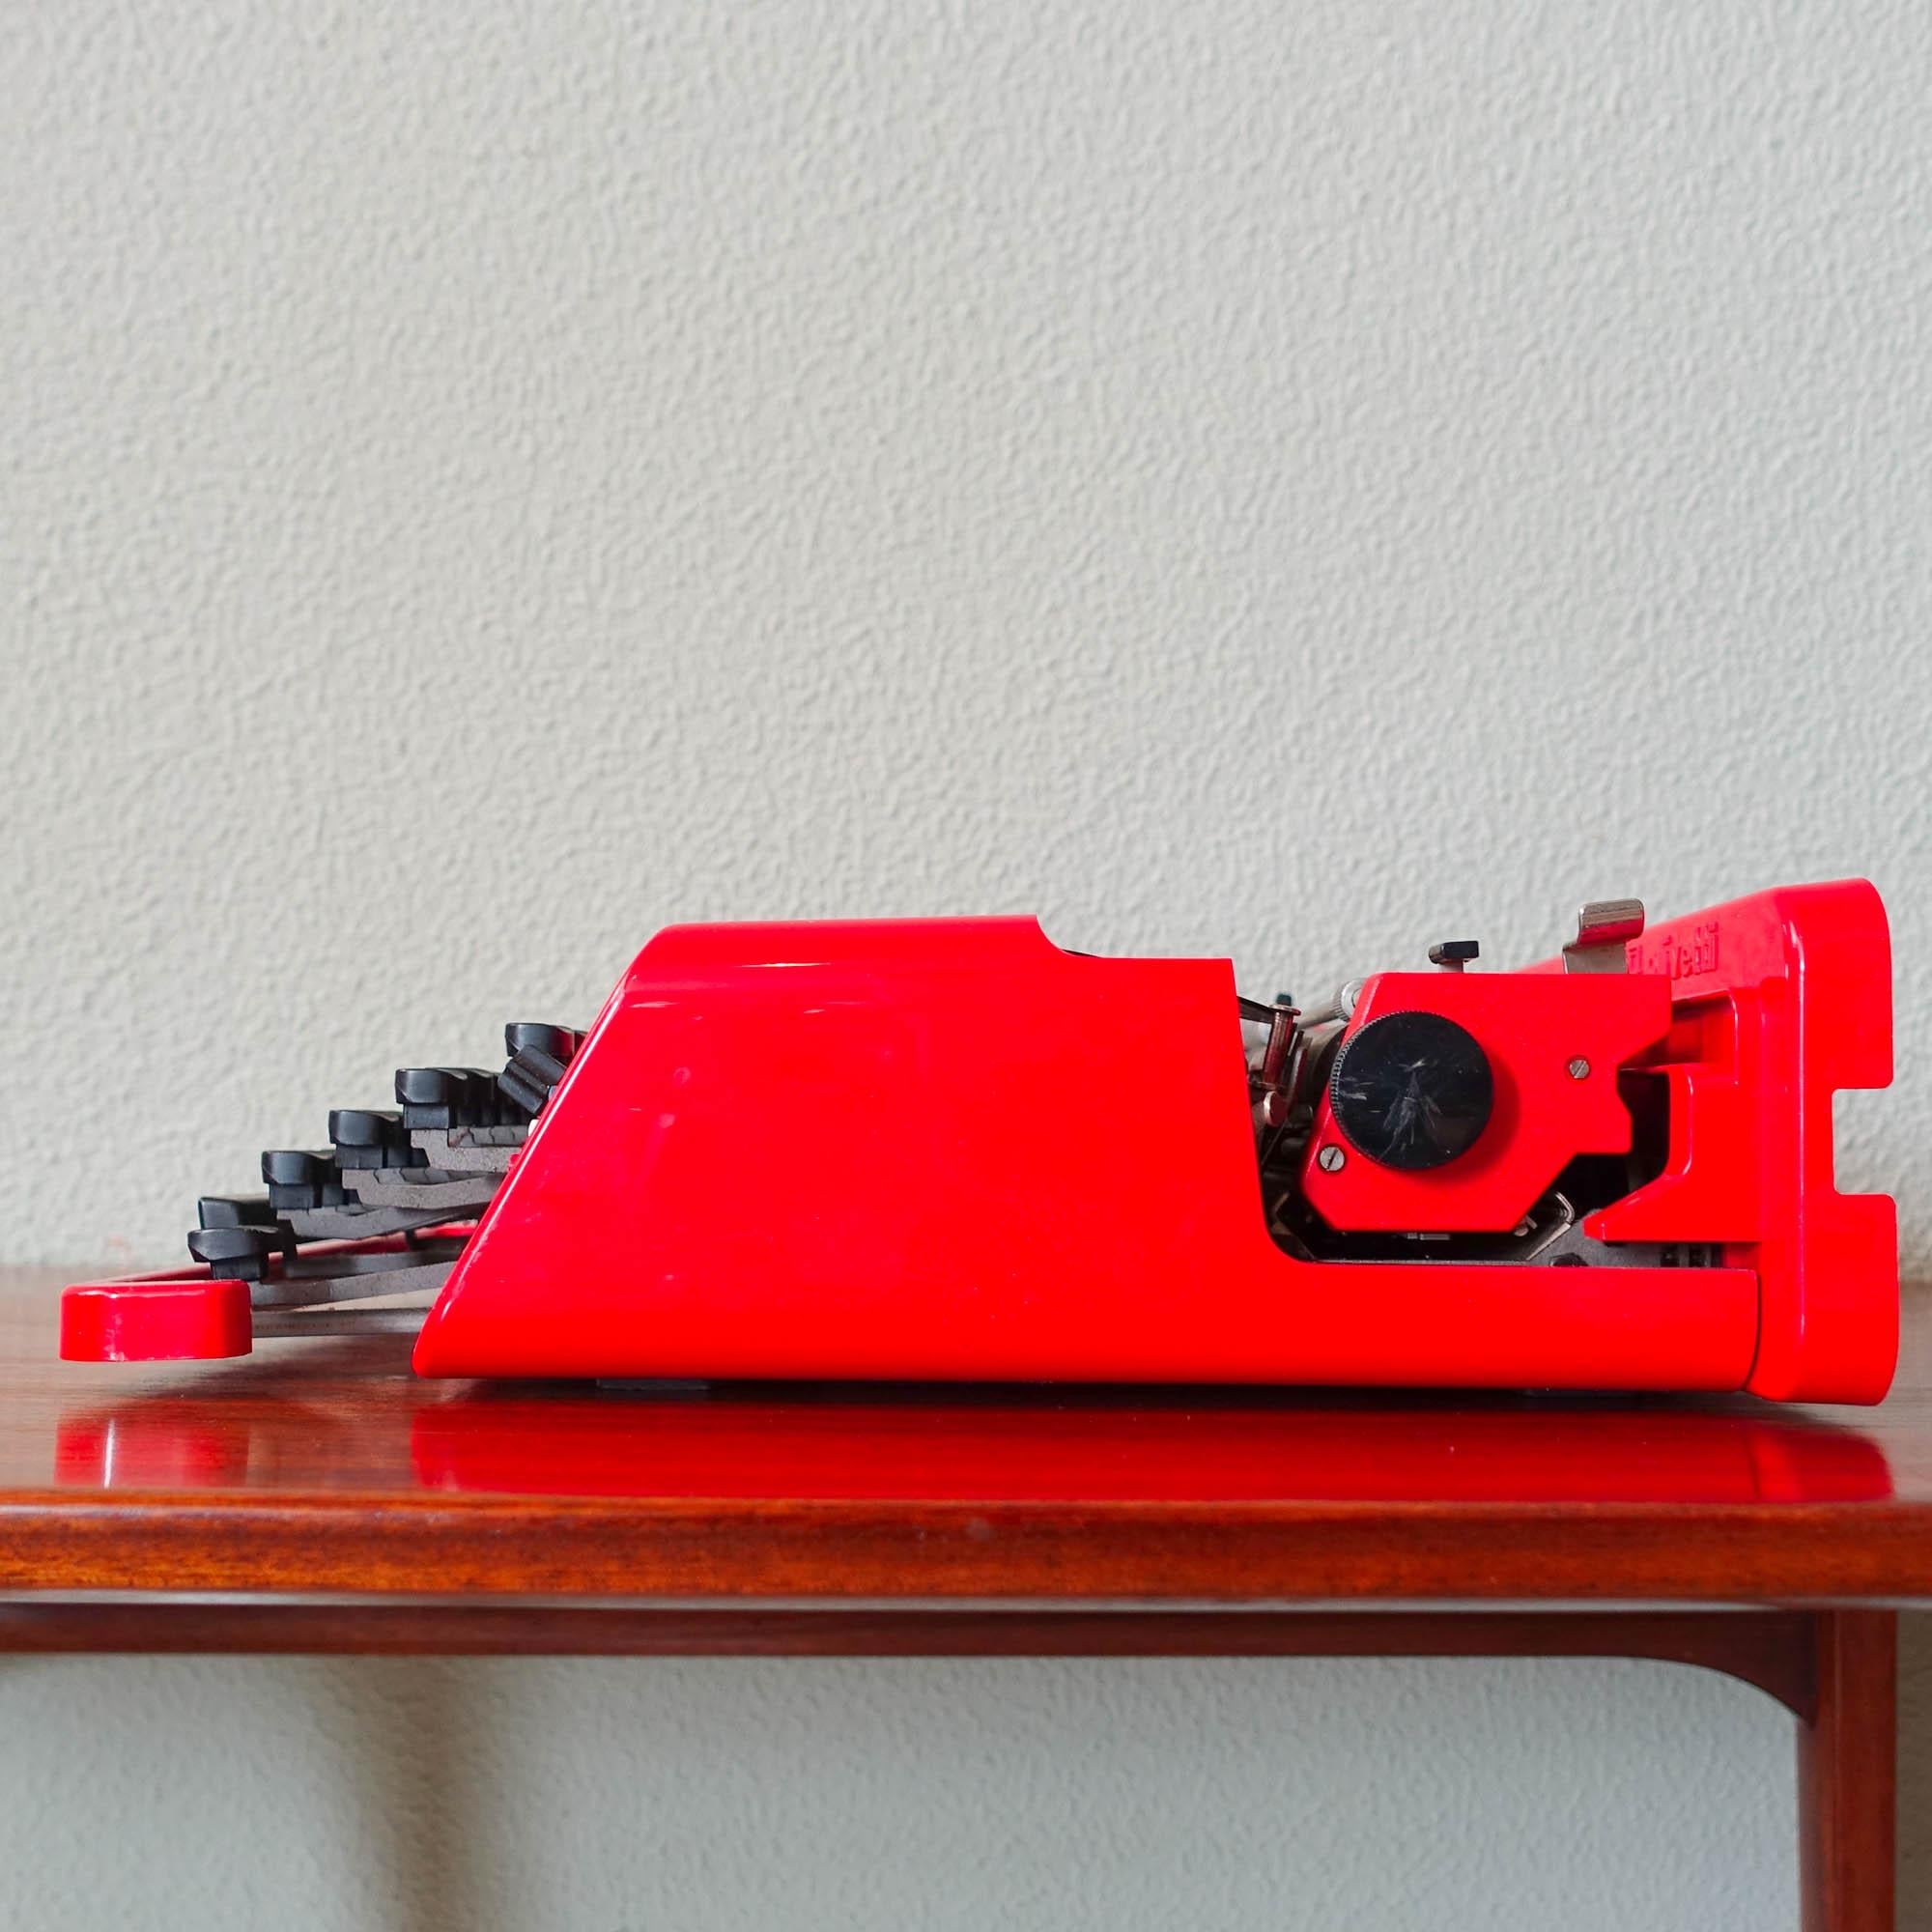 Plastique Type-writer rouge Valentine d'Ettore Sottsass & Perry King pour Olivetti Synthesis